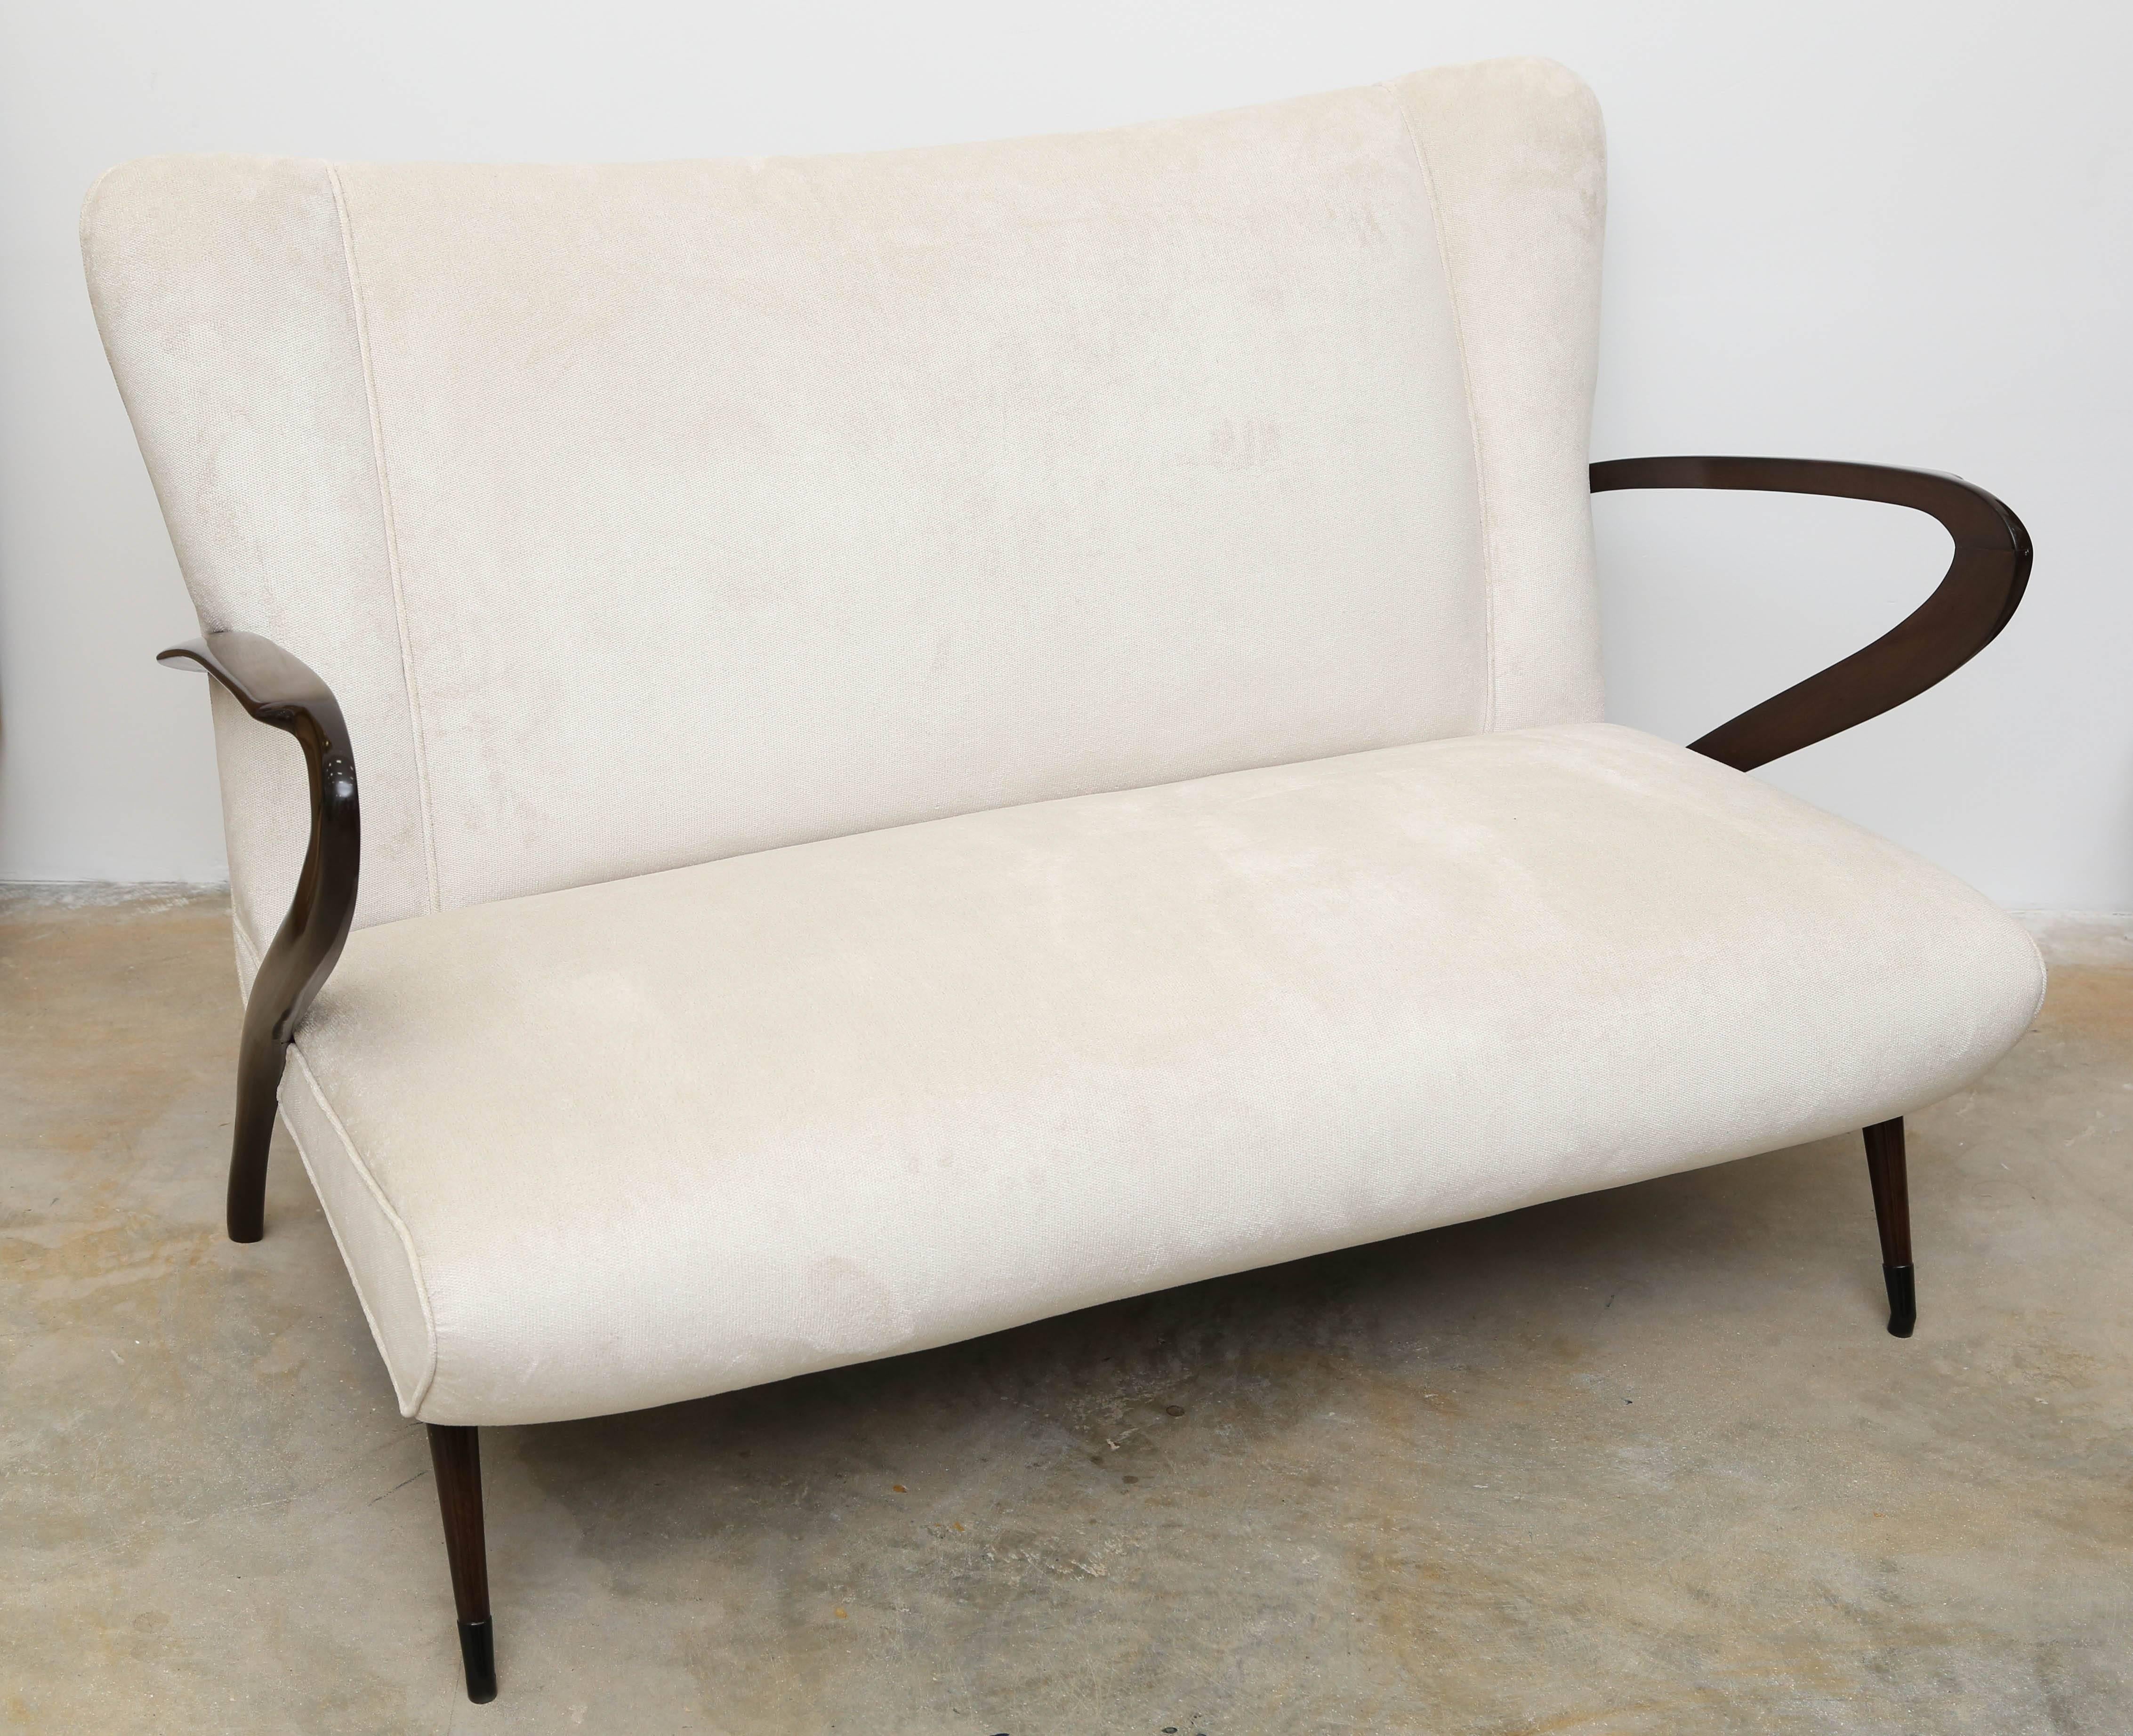 Interesting armrest and design for the Italian sofa in the Ico Parisi style.
White fabric.
Loveseat , easy to include in a contemporary interior.
Completely reupholstered.